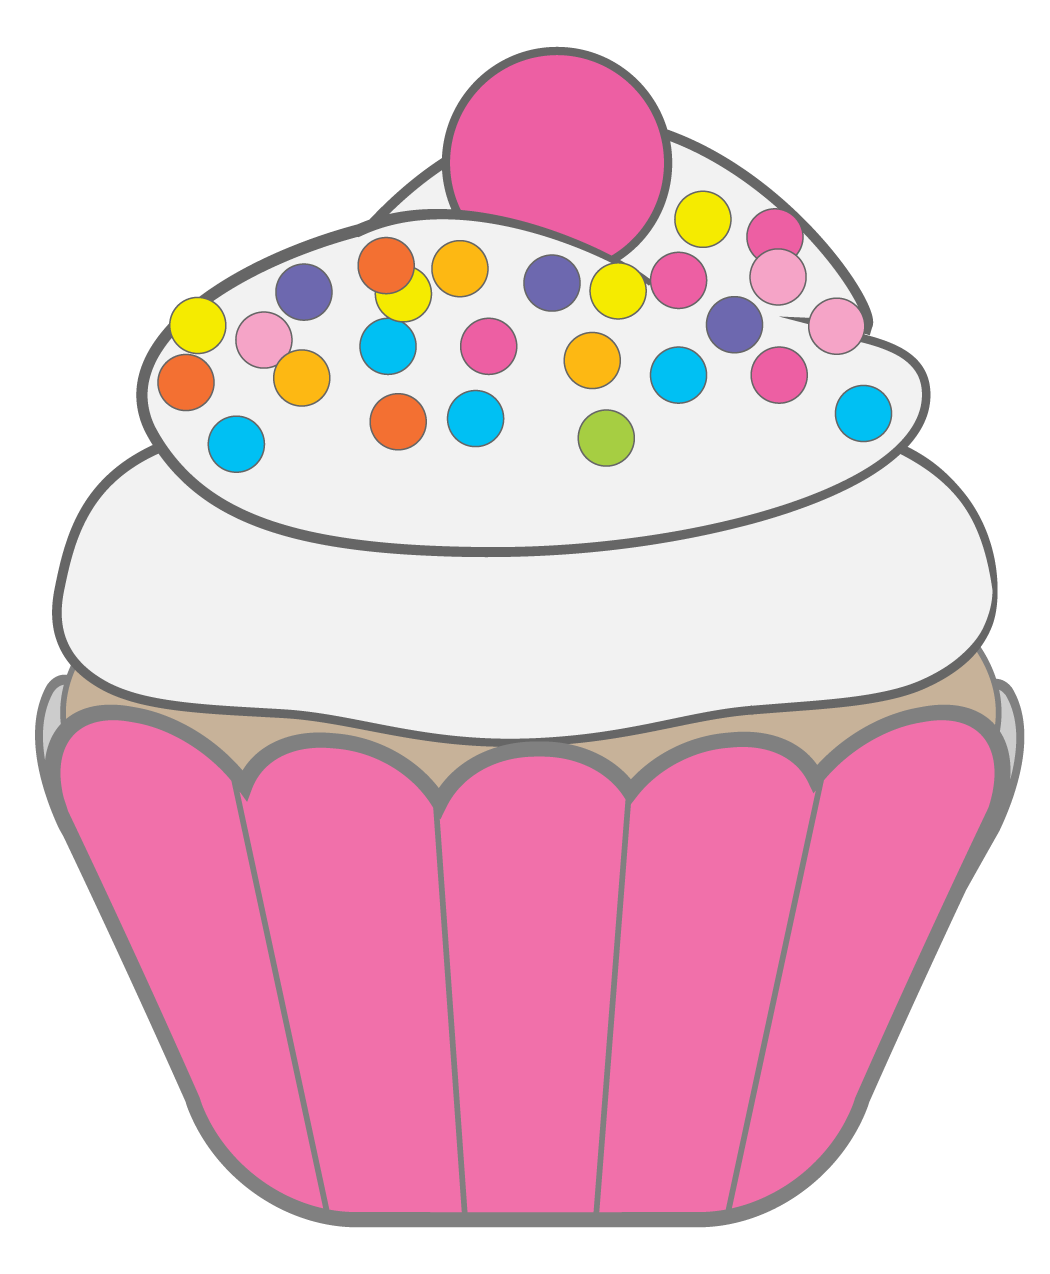 Cupcake clipart black and white free clipart images